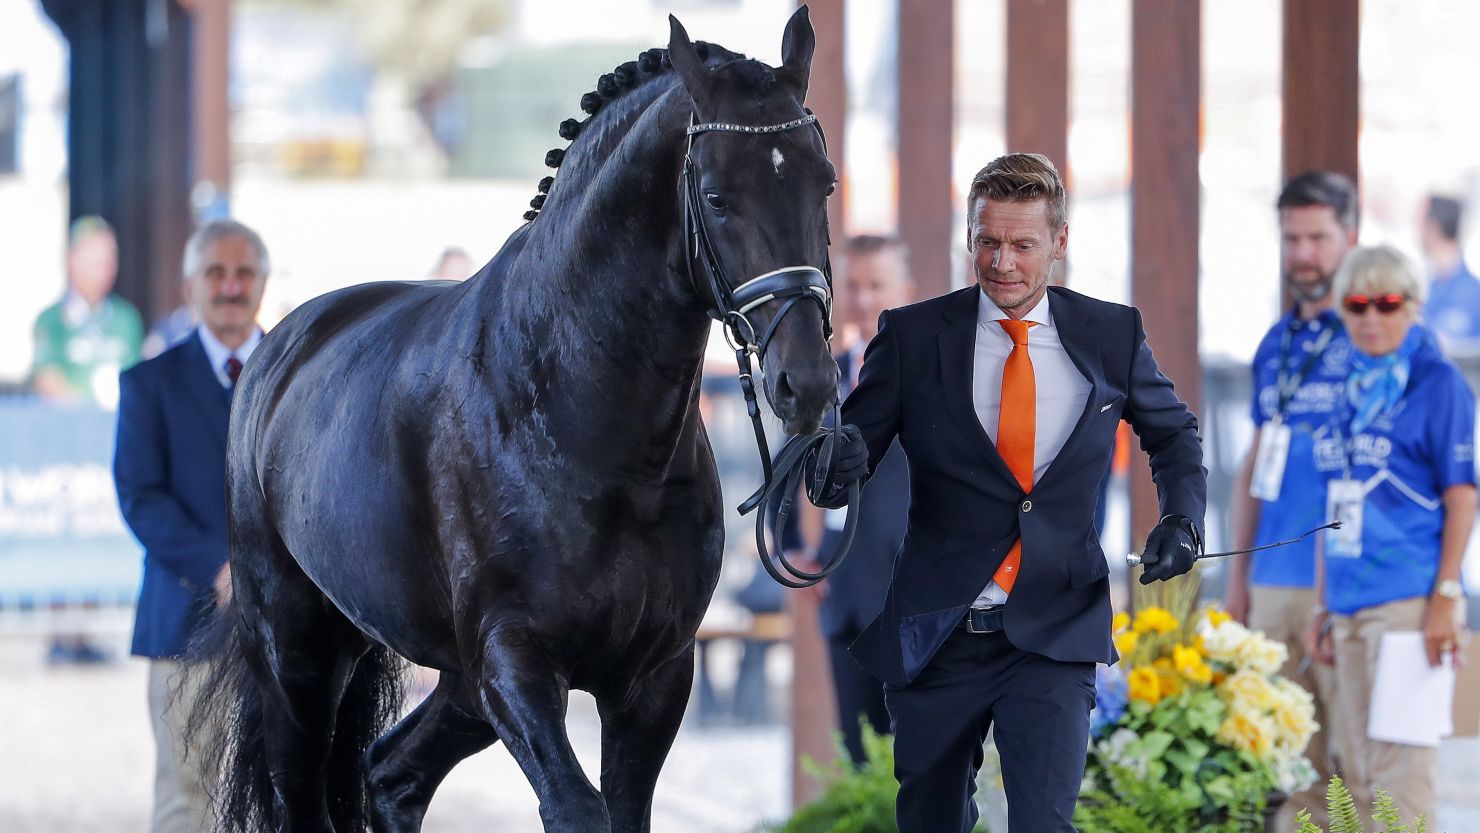 Dressage rider Edward Gal and his horse Glock's Zonik N.O.P. of the Netherlands participate in inspection on Tuesday. 